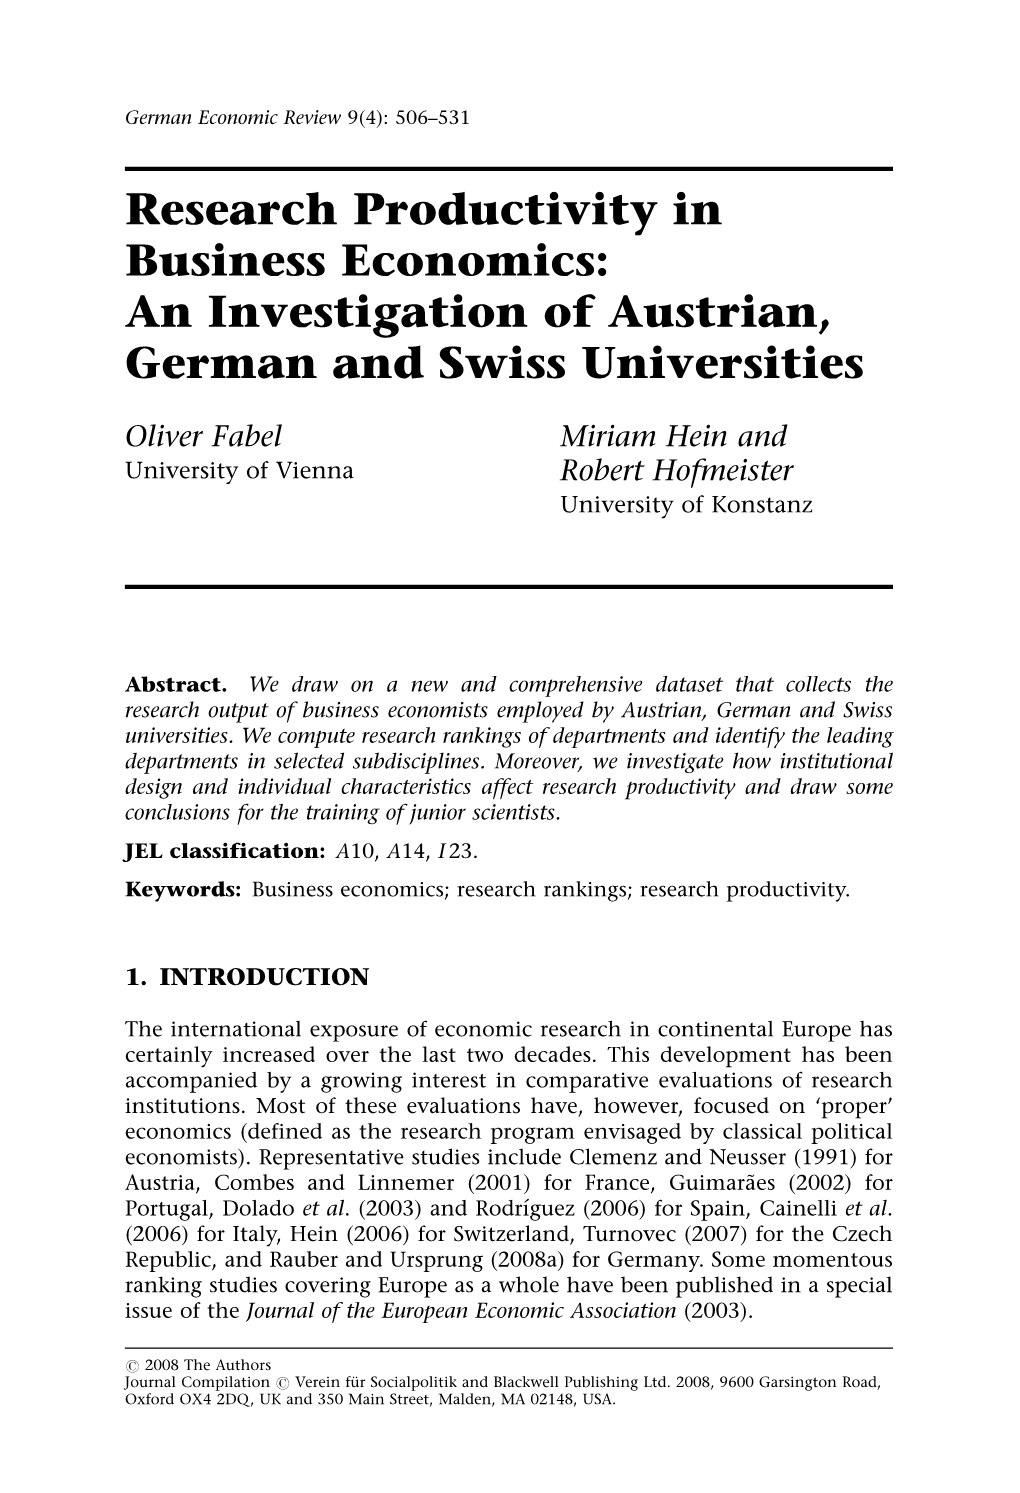 Research Productivity in Business Economics: an Investigation of Austrian, German and Swiss Universities